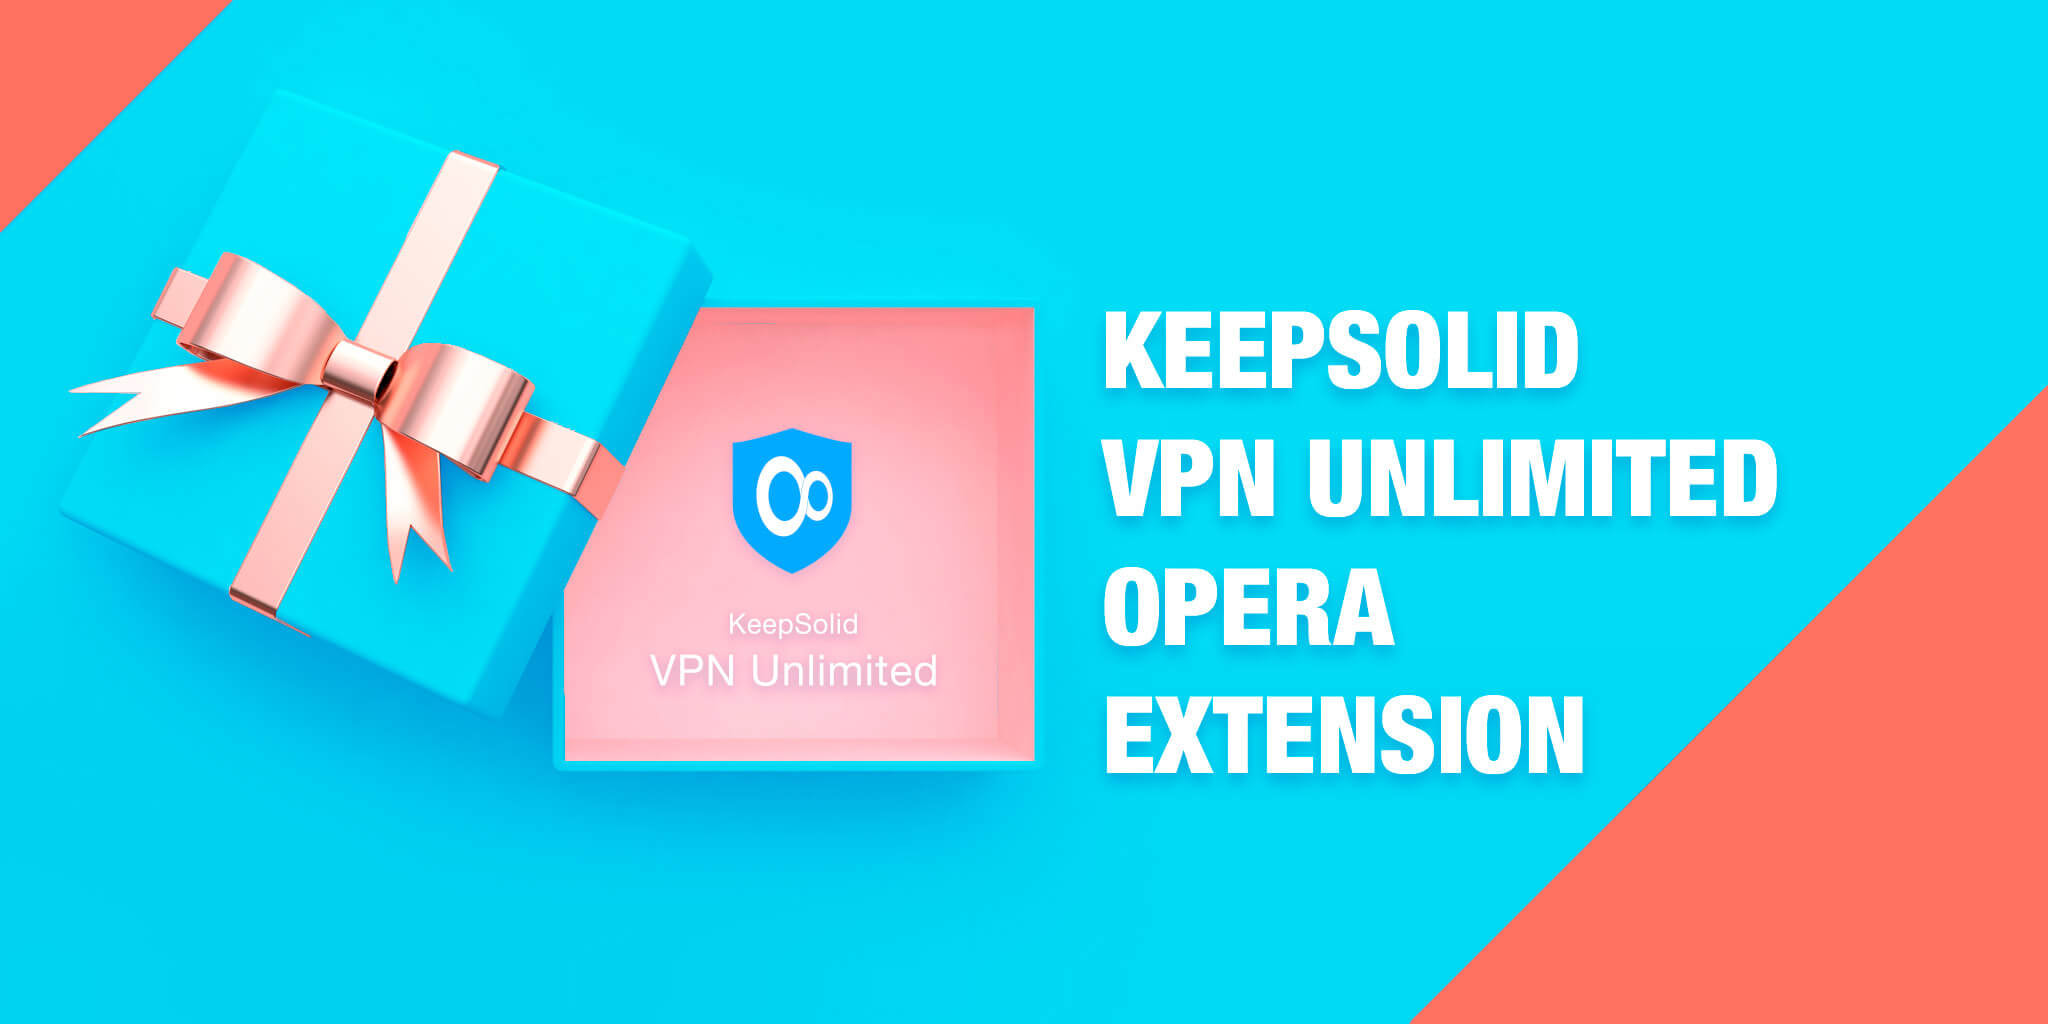 KeepSolid VPN Unlimited extension for Opera browser